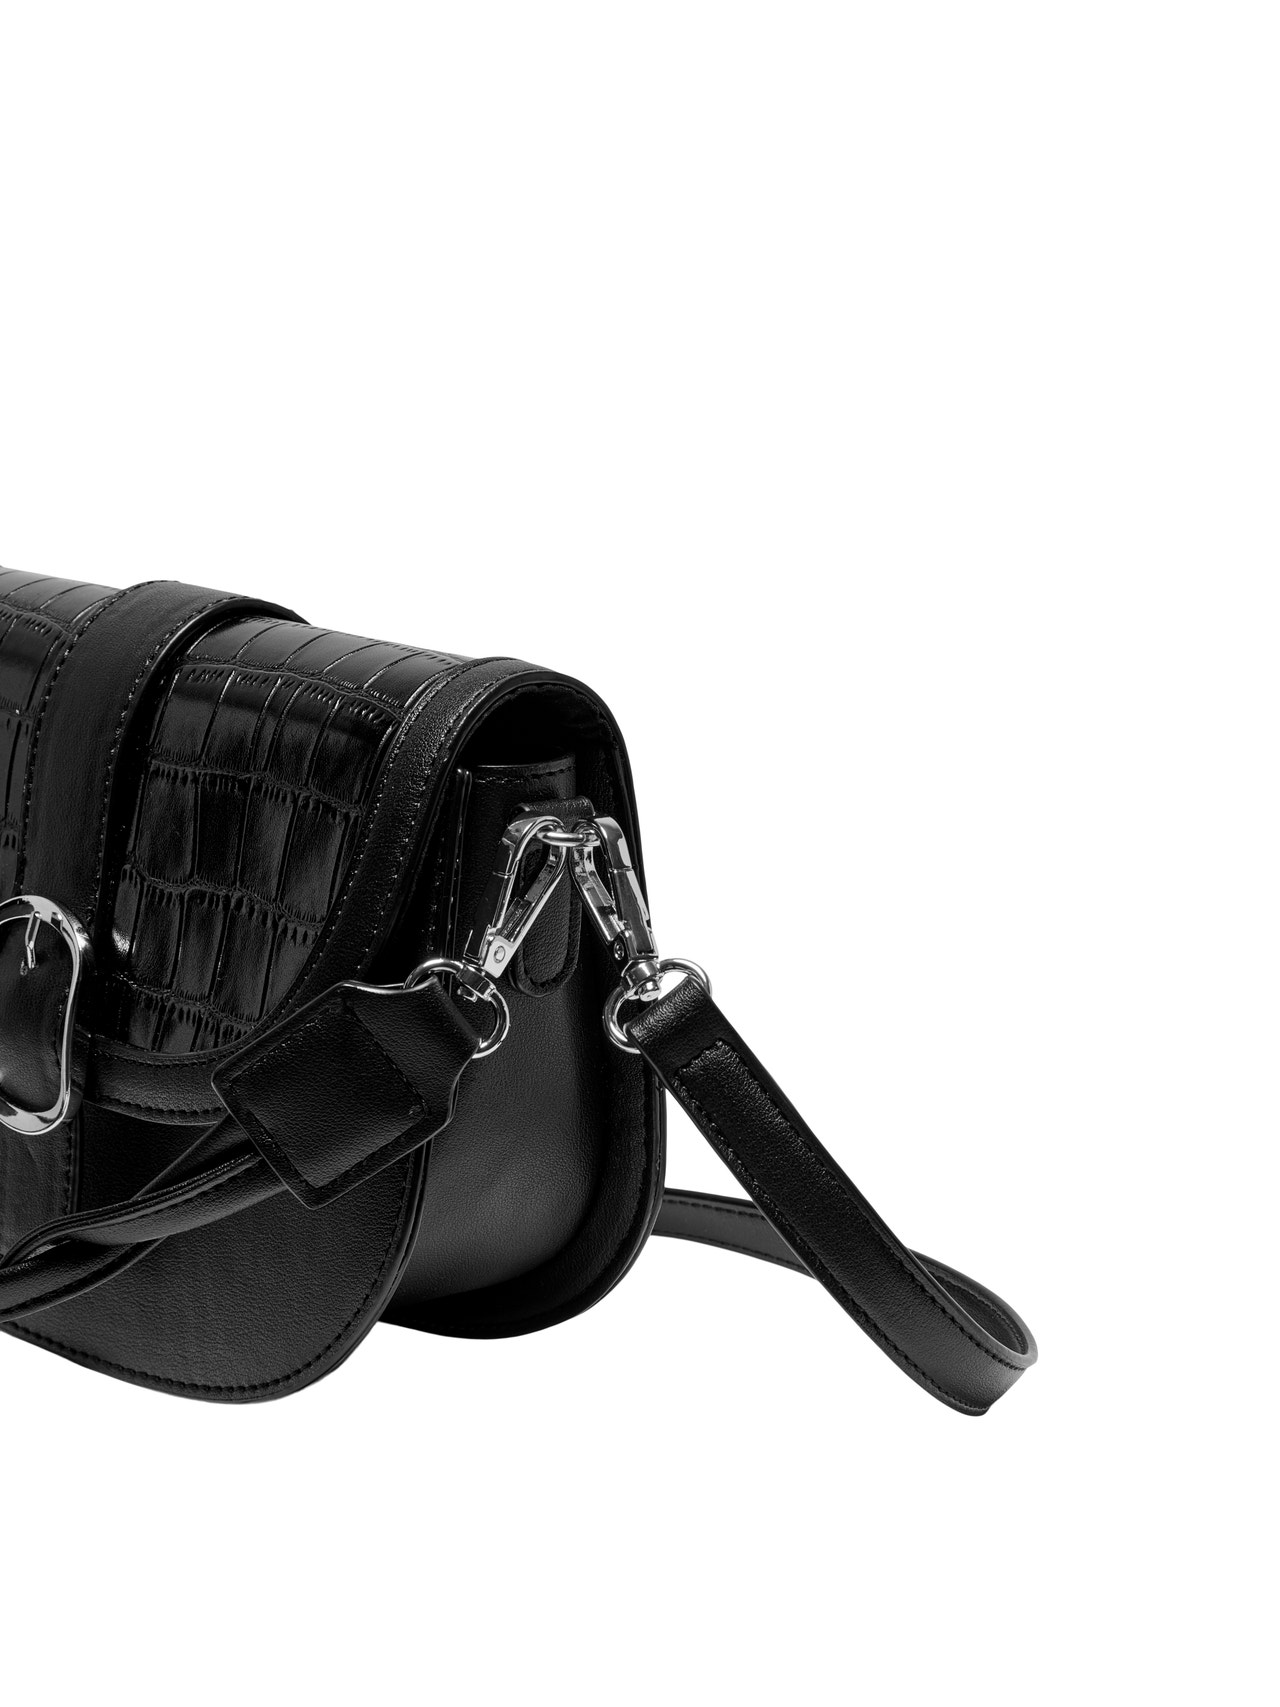 Detachable strap Bag with 40% discount!